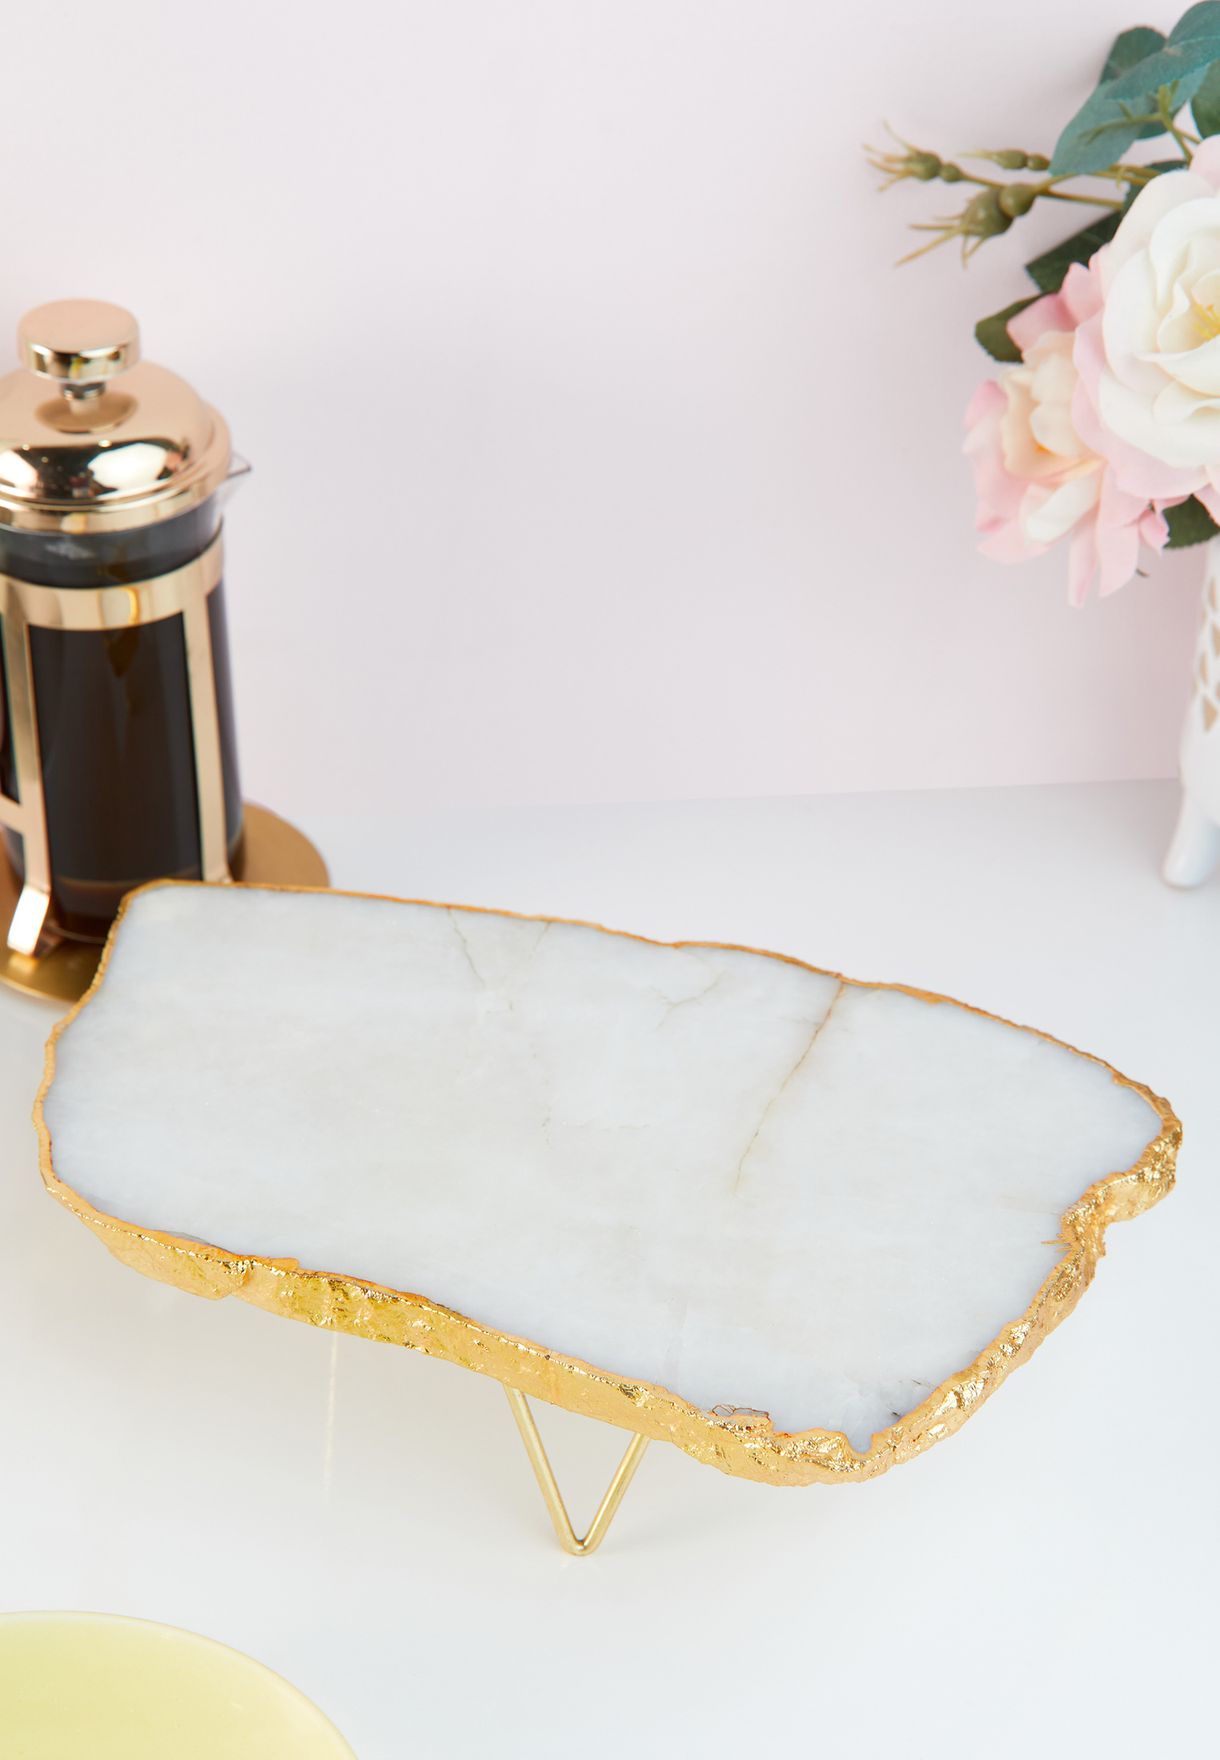 White Quartz Cake Stand With Gold Detailing